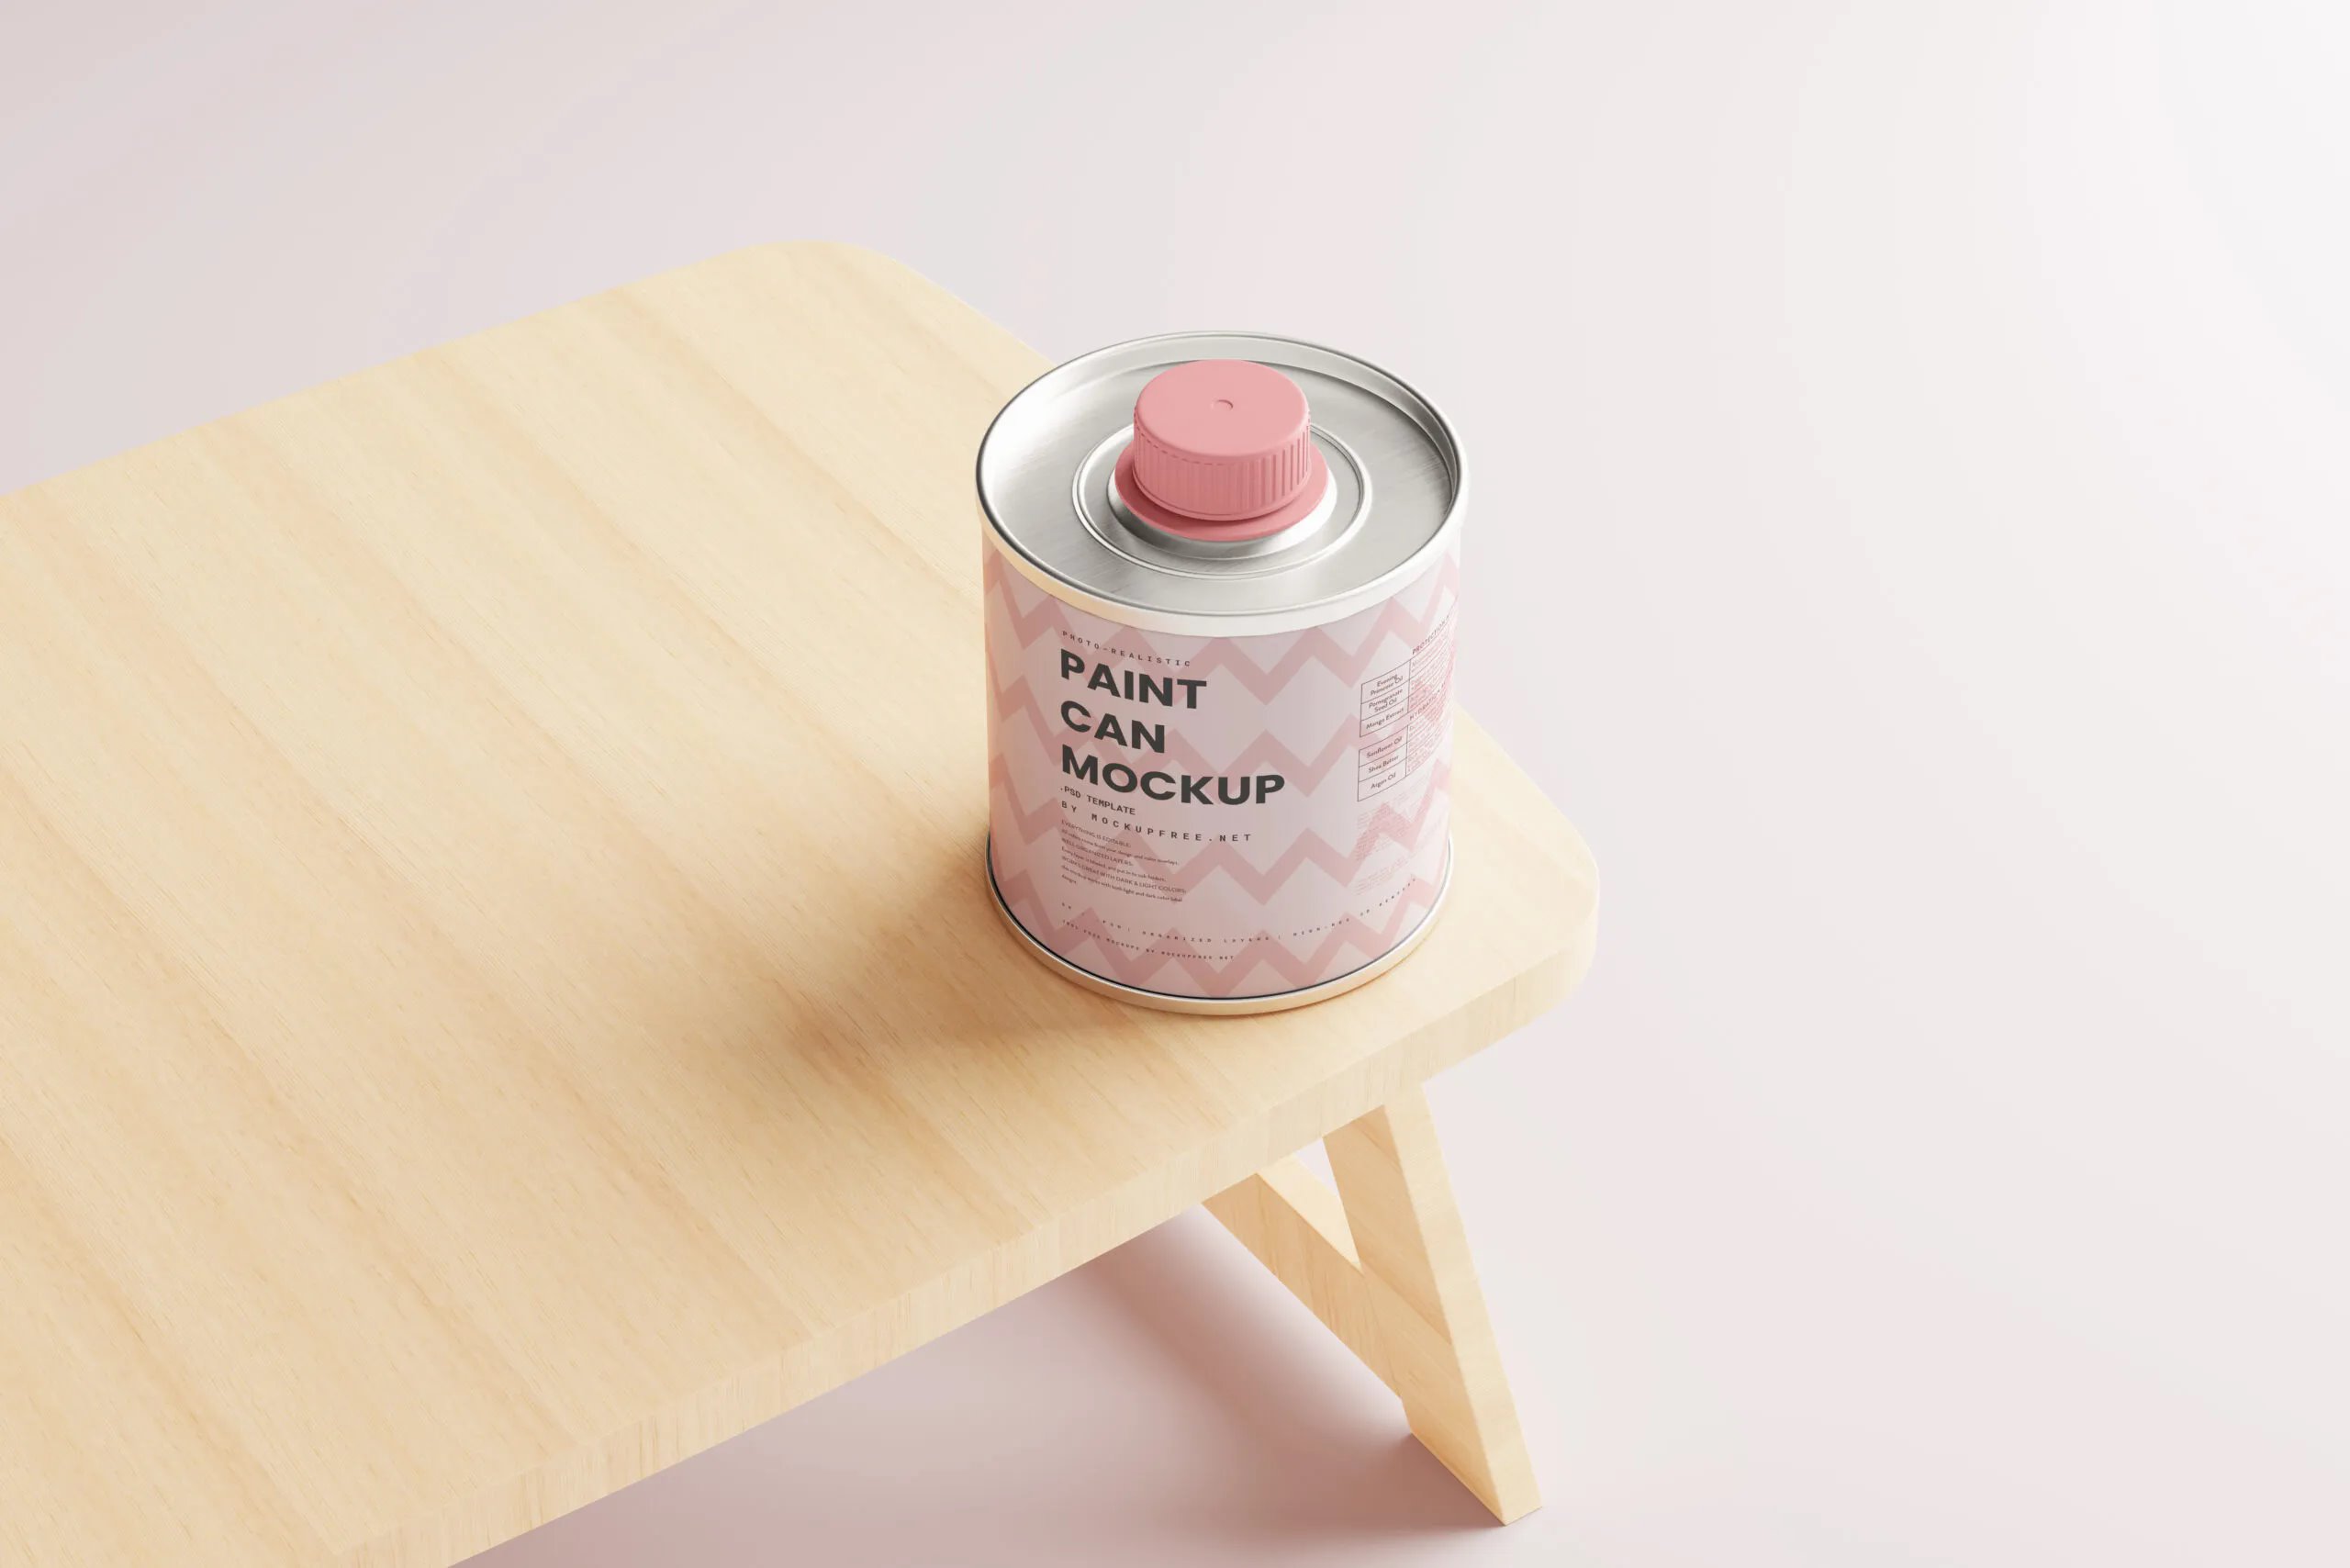 10 Paint Can Mockups in Different Visions FREE PSD